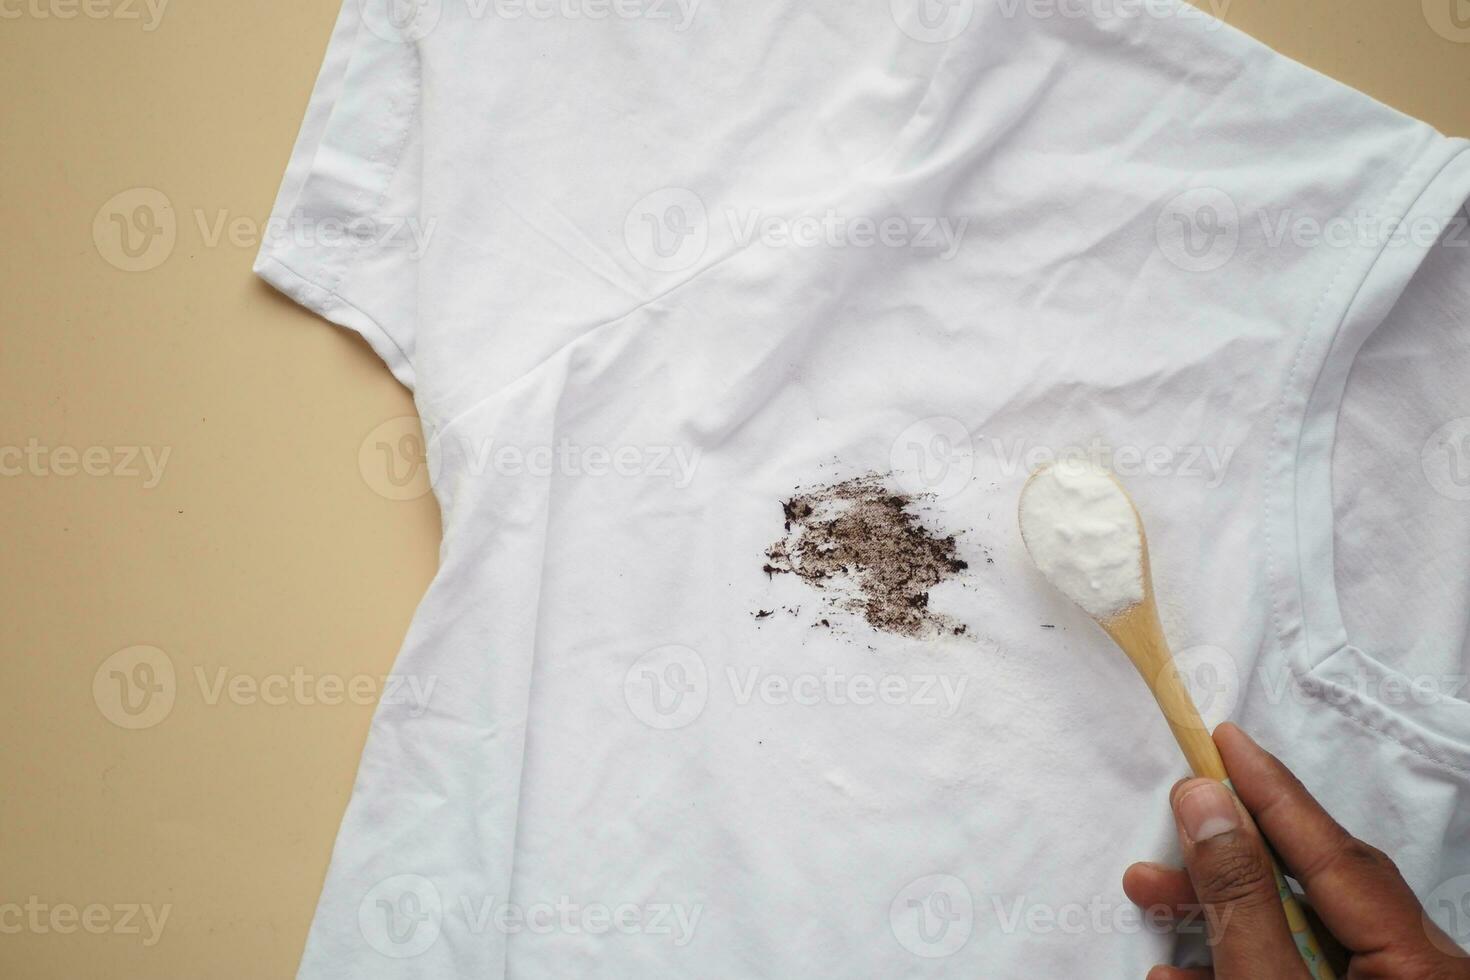 hand removing stain on clothes with biocarbonat photo